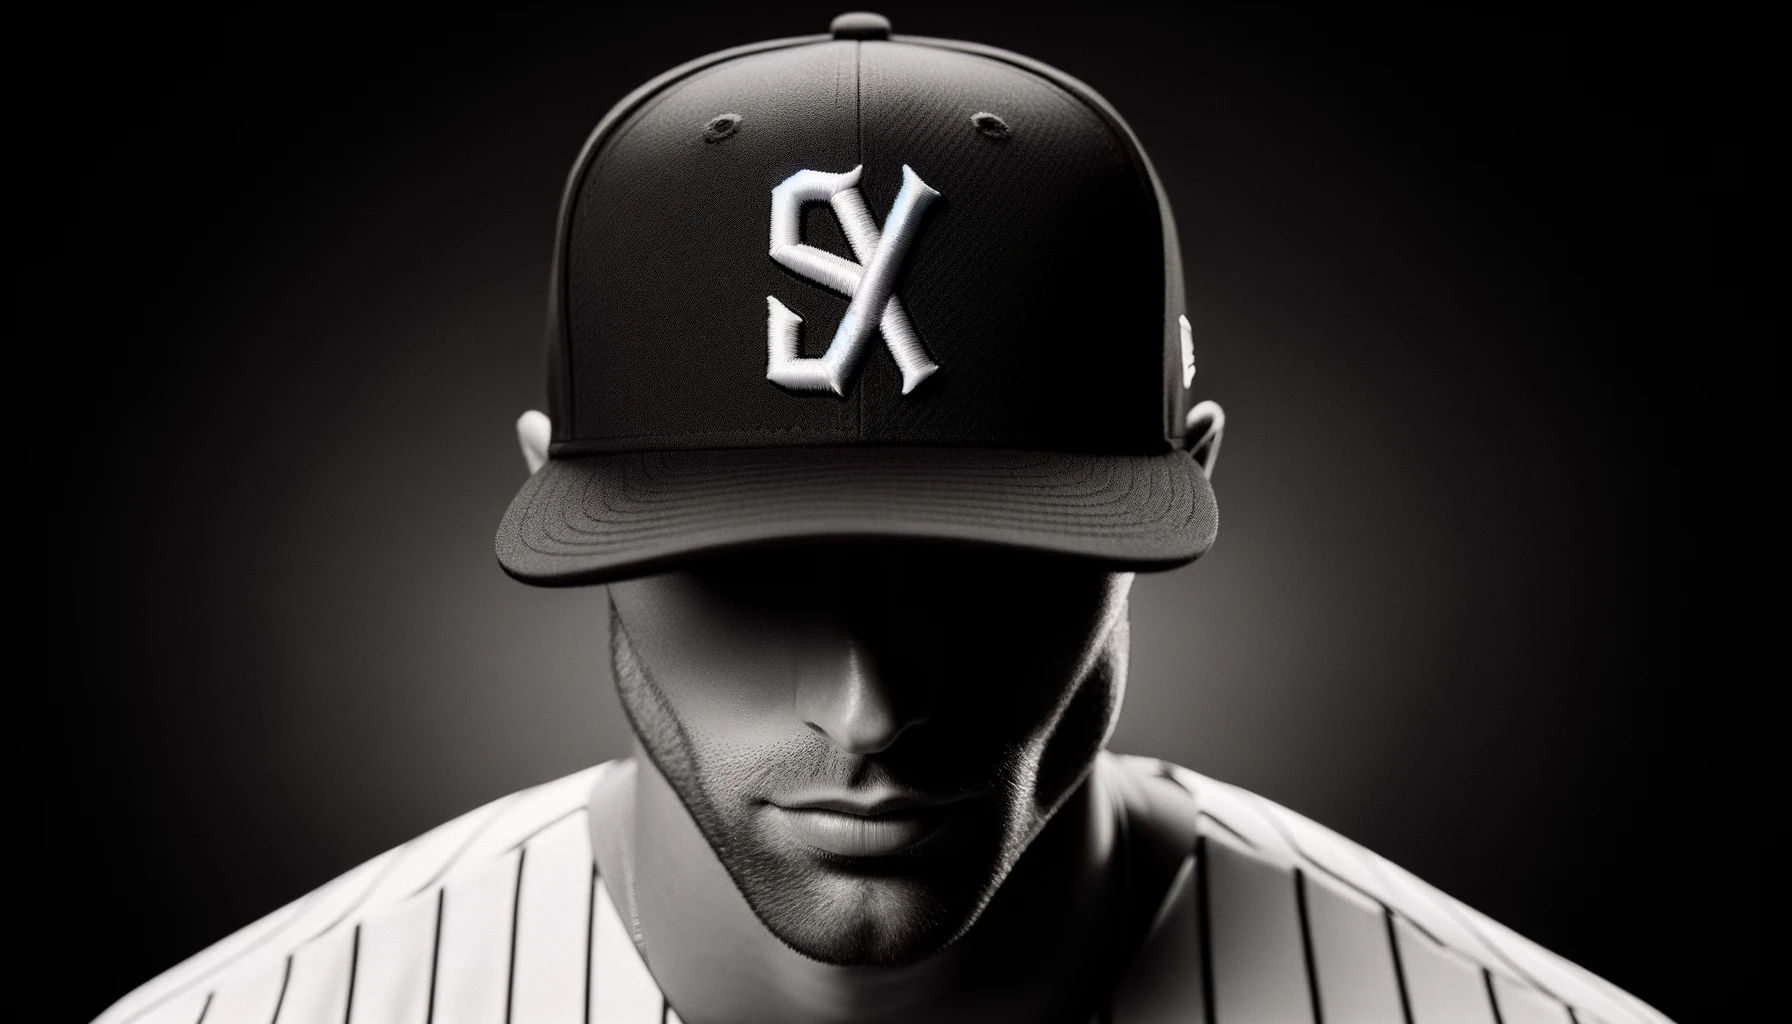 A major league baseball player wearing a cap with a large black and white logo in the center. The cap features 'SX' letters, with the logo blurred, removed, or not visible from the angle. The image focuses on the player's athletic and stylish appearance.